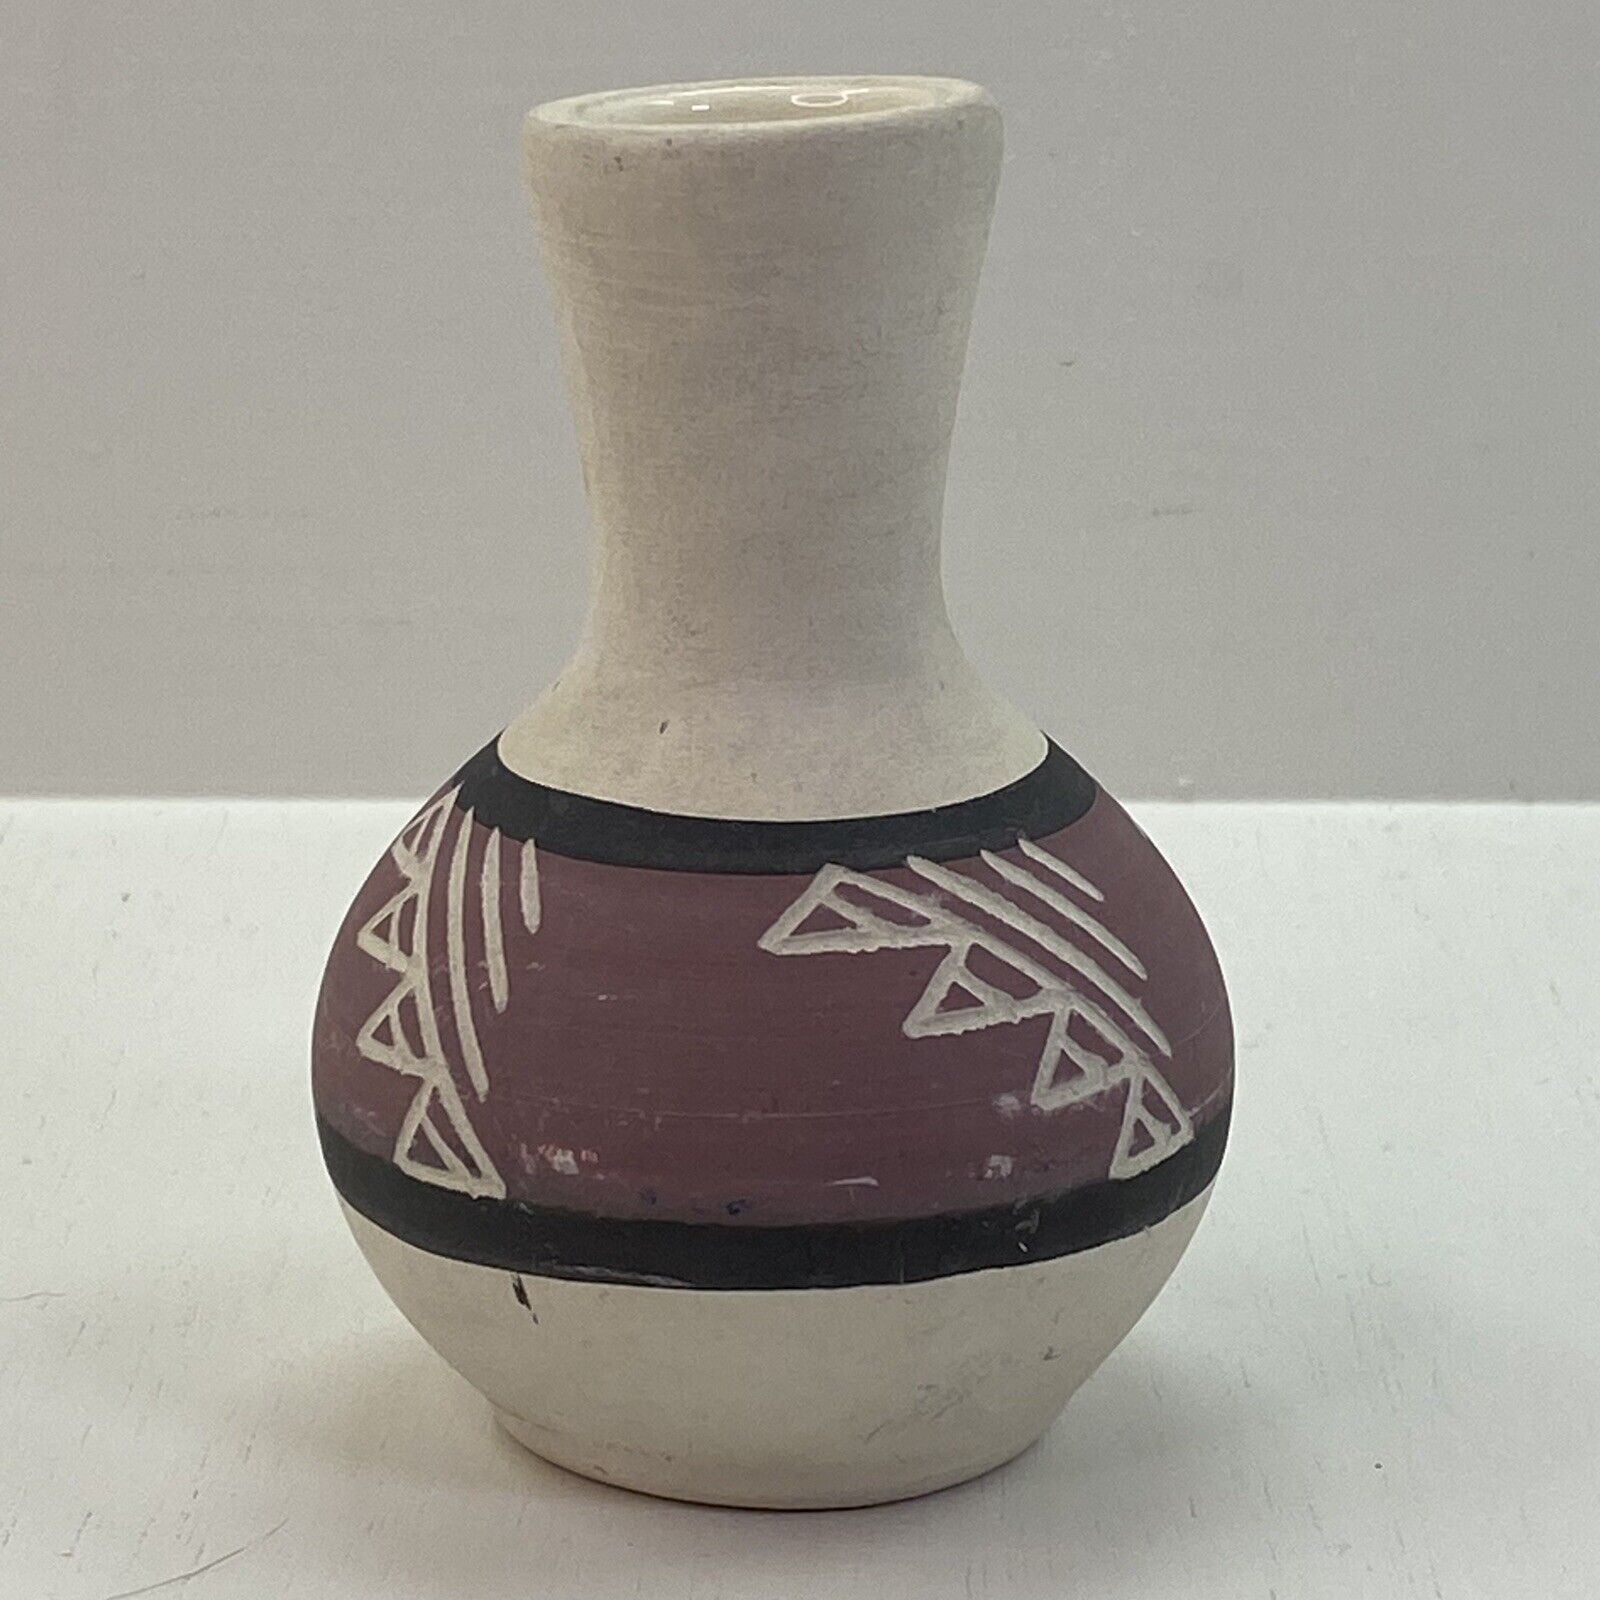 Sioux Indian Signed Art Pottery Bud Vase SPRC SD Handmade Native American Plum